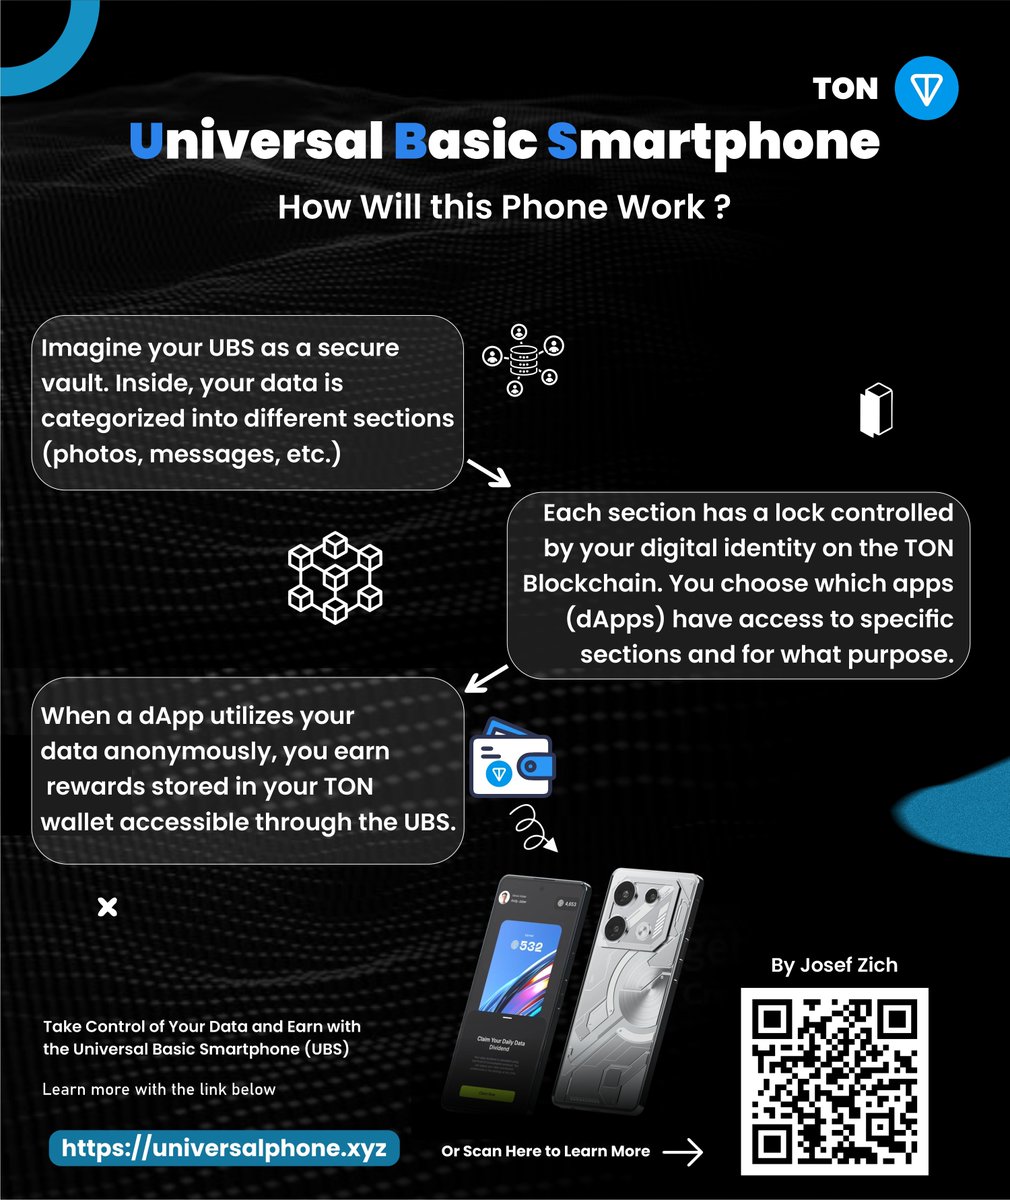 Imagine a smartphone that not only connects you but empowers you.  The UBS (Universal Basic Smartphone) from @oysterecosystem does just that by integrating with the @ton_blockchain, a revolutionary technology.

But before diving in, let's break down the key players:

1.